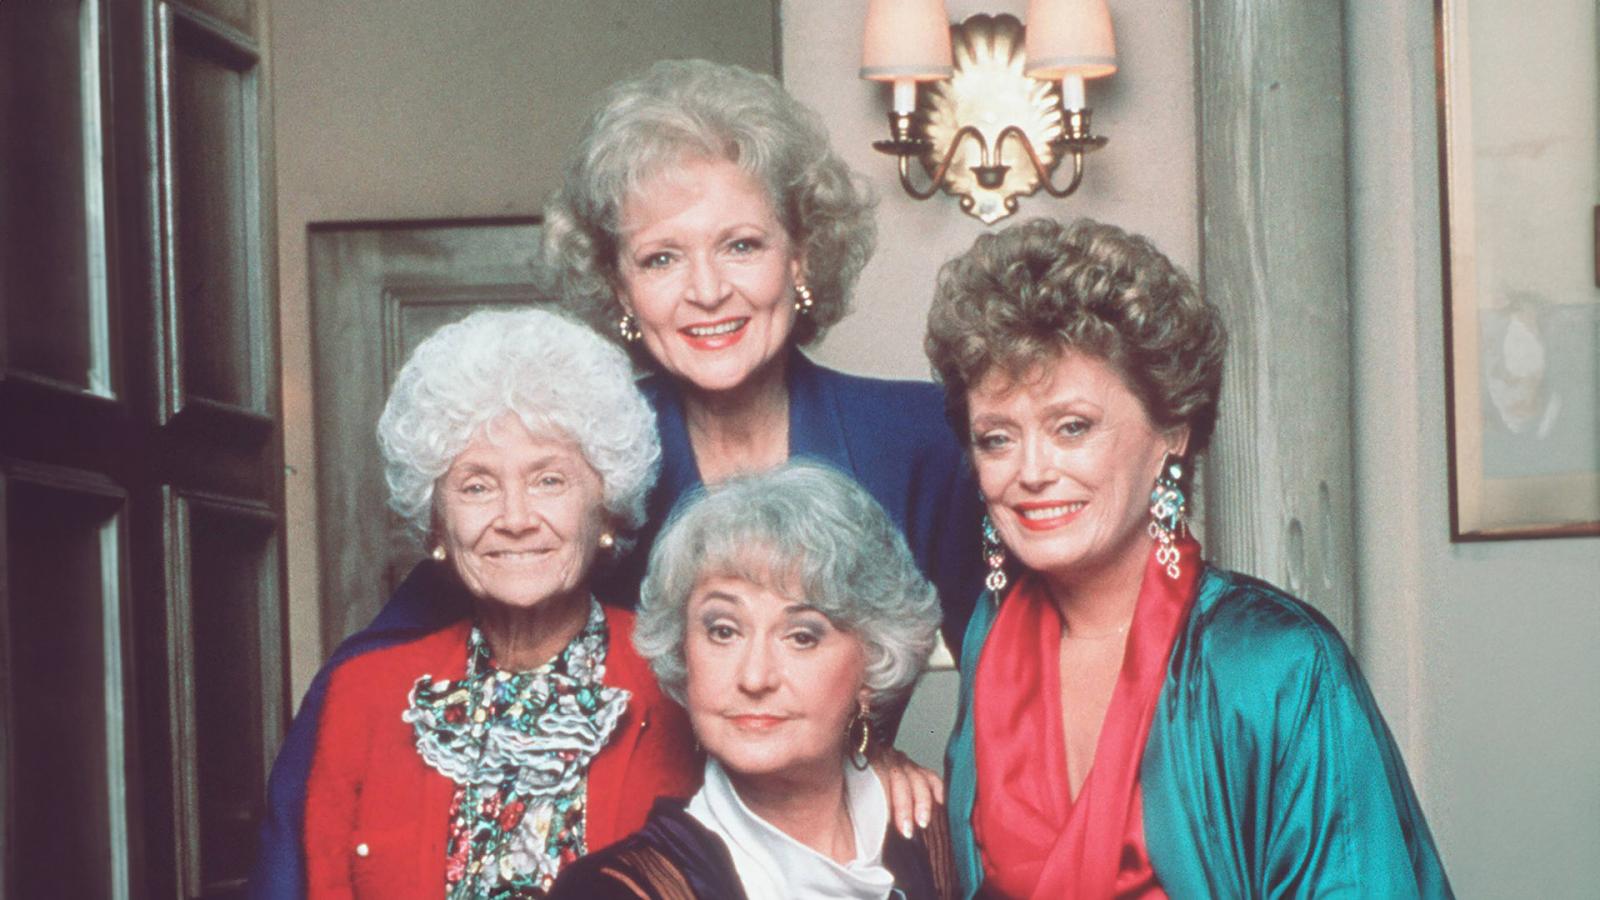 10 Classic TV Shows That Still Hold Up Decades Later (Not Friends, Though) - image 7